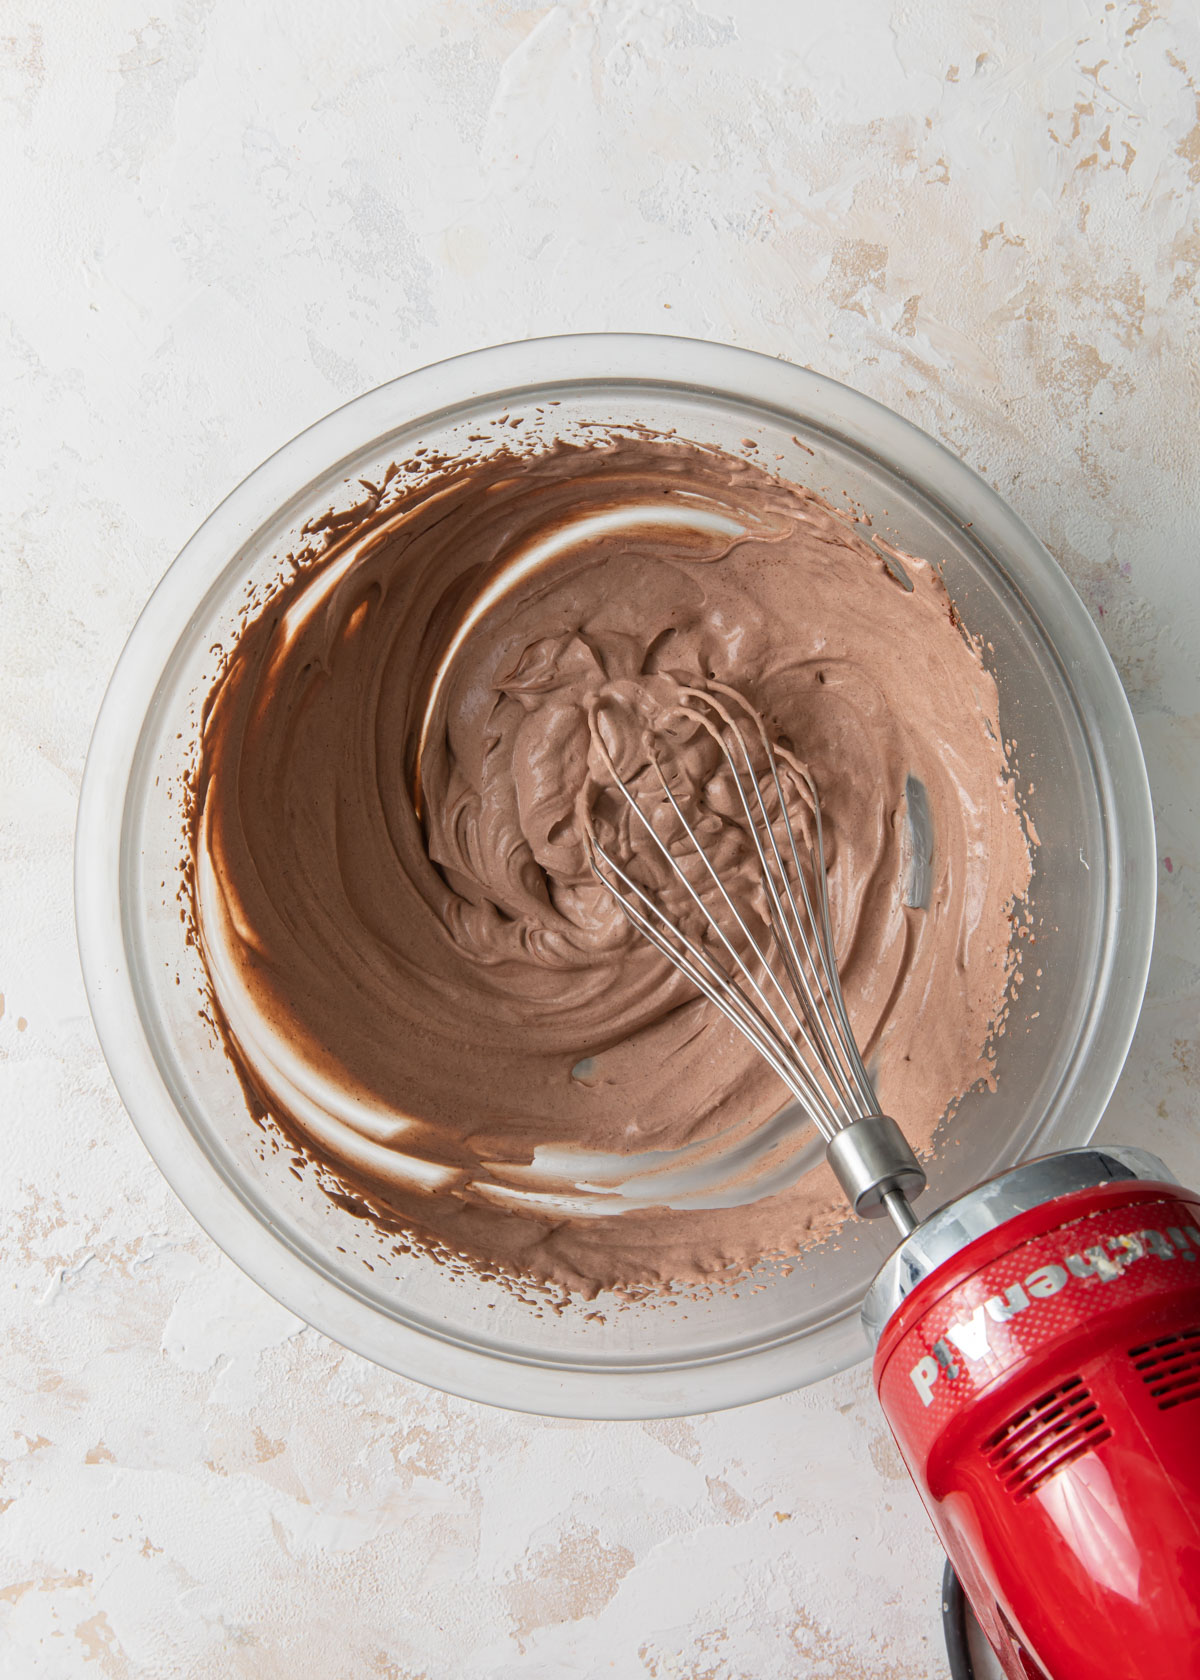 Chocolate whipped cream being whisked in a bowl and starting to thicken